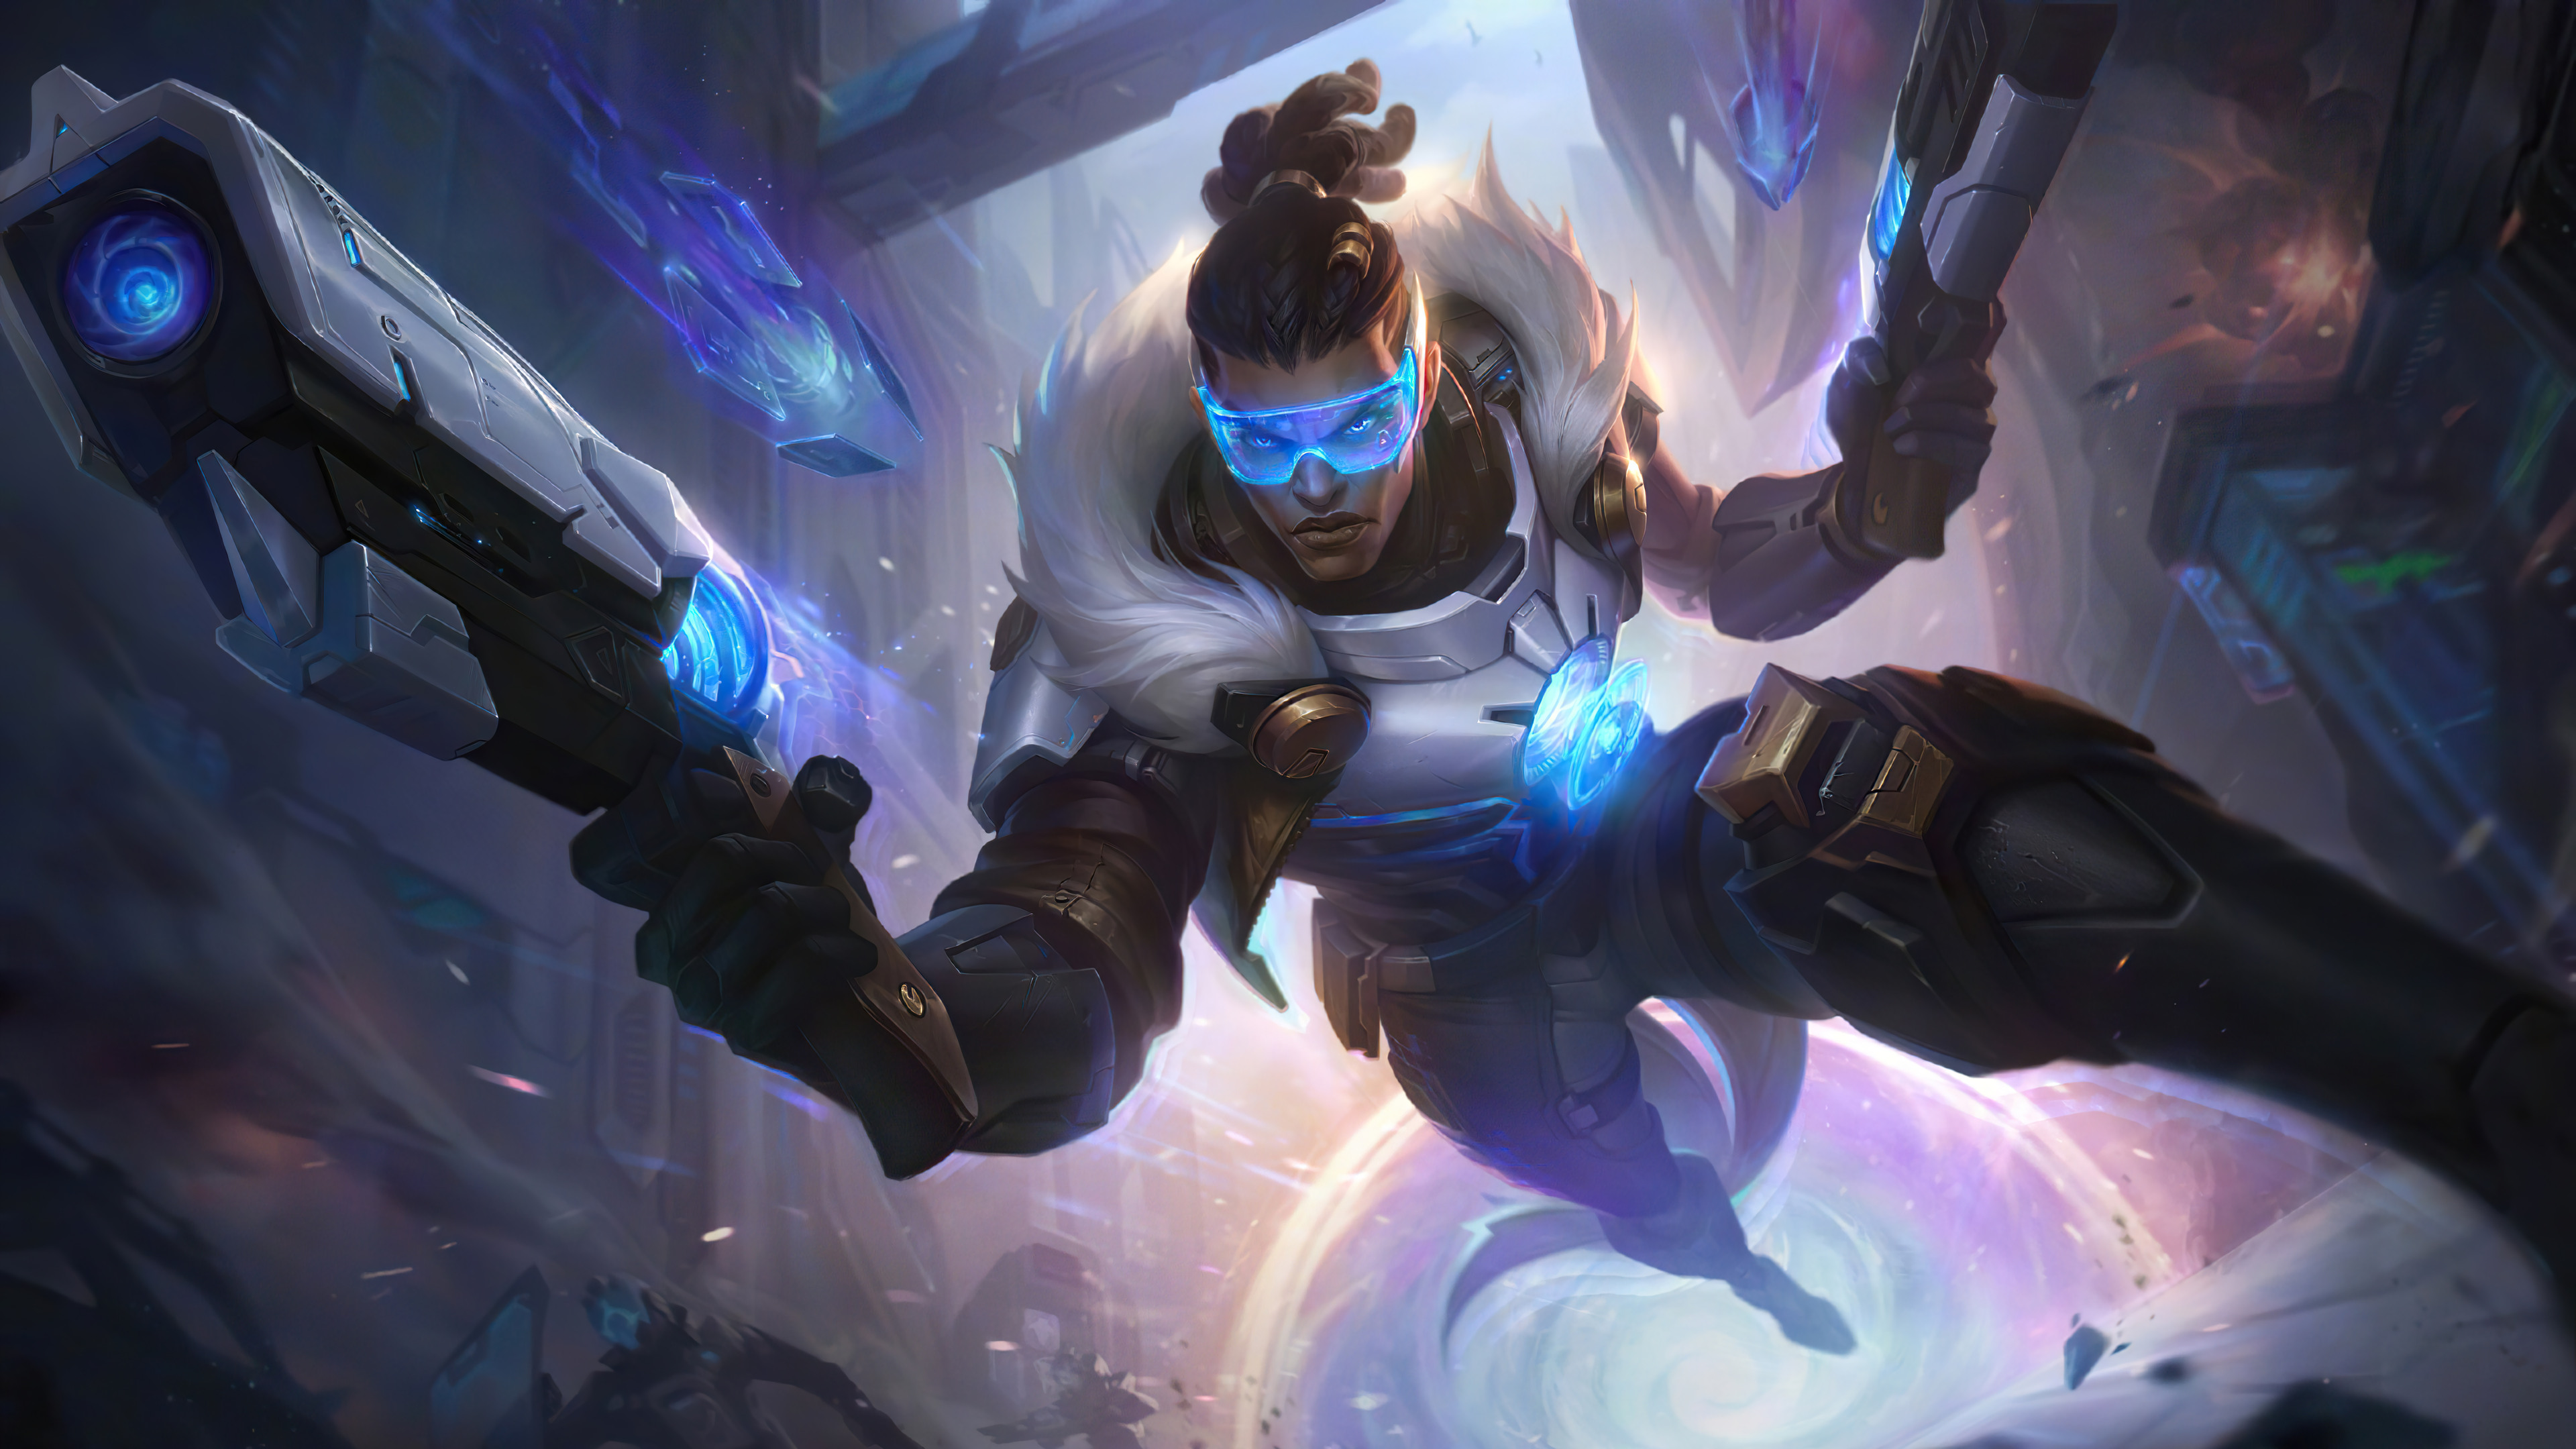 General 3840x2160 Lucian Lucian (League of Legends) ADC AD carry League of Legends Riot Games fire futuristic video game characters PC gaming weapon GZG Pulsefire (League of Legends)